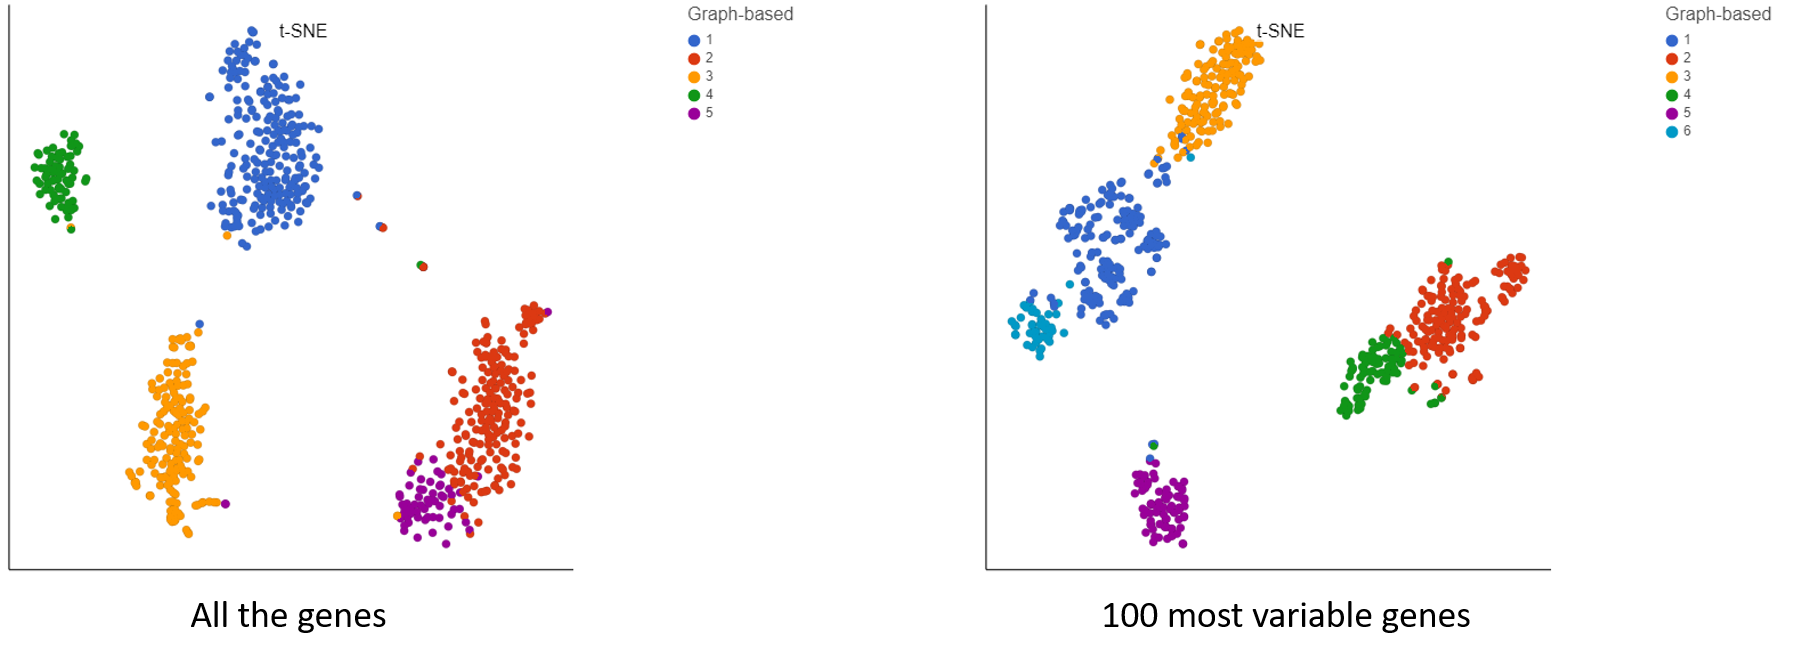 tSNE plot showing impact of gene filtering on cell clustering